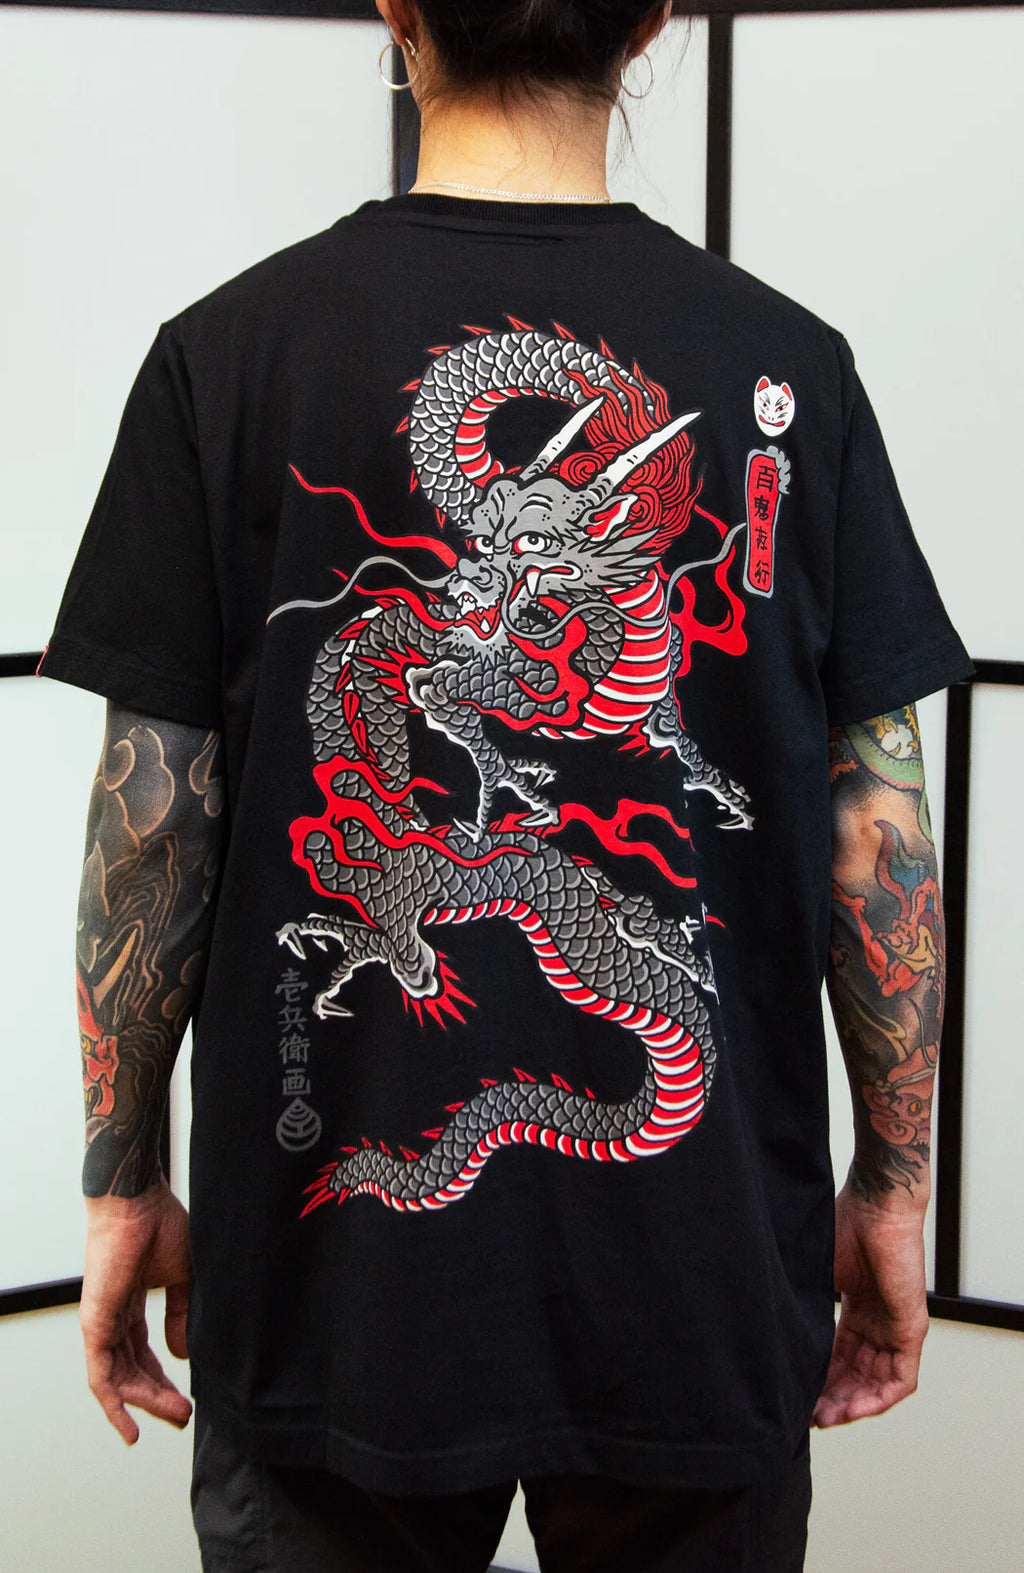 CINK x Hundred Demons "Traditional Dragon" by Ichibay